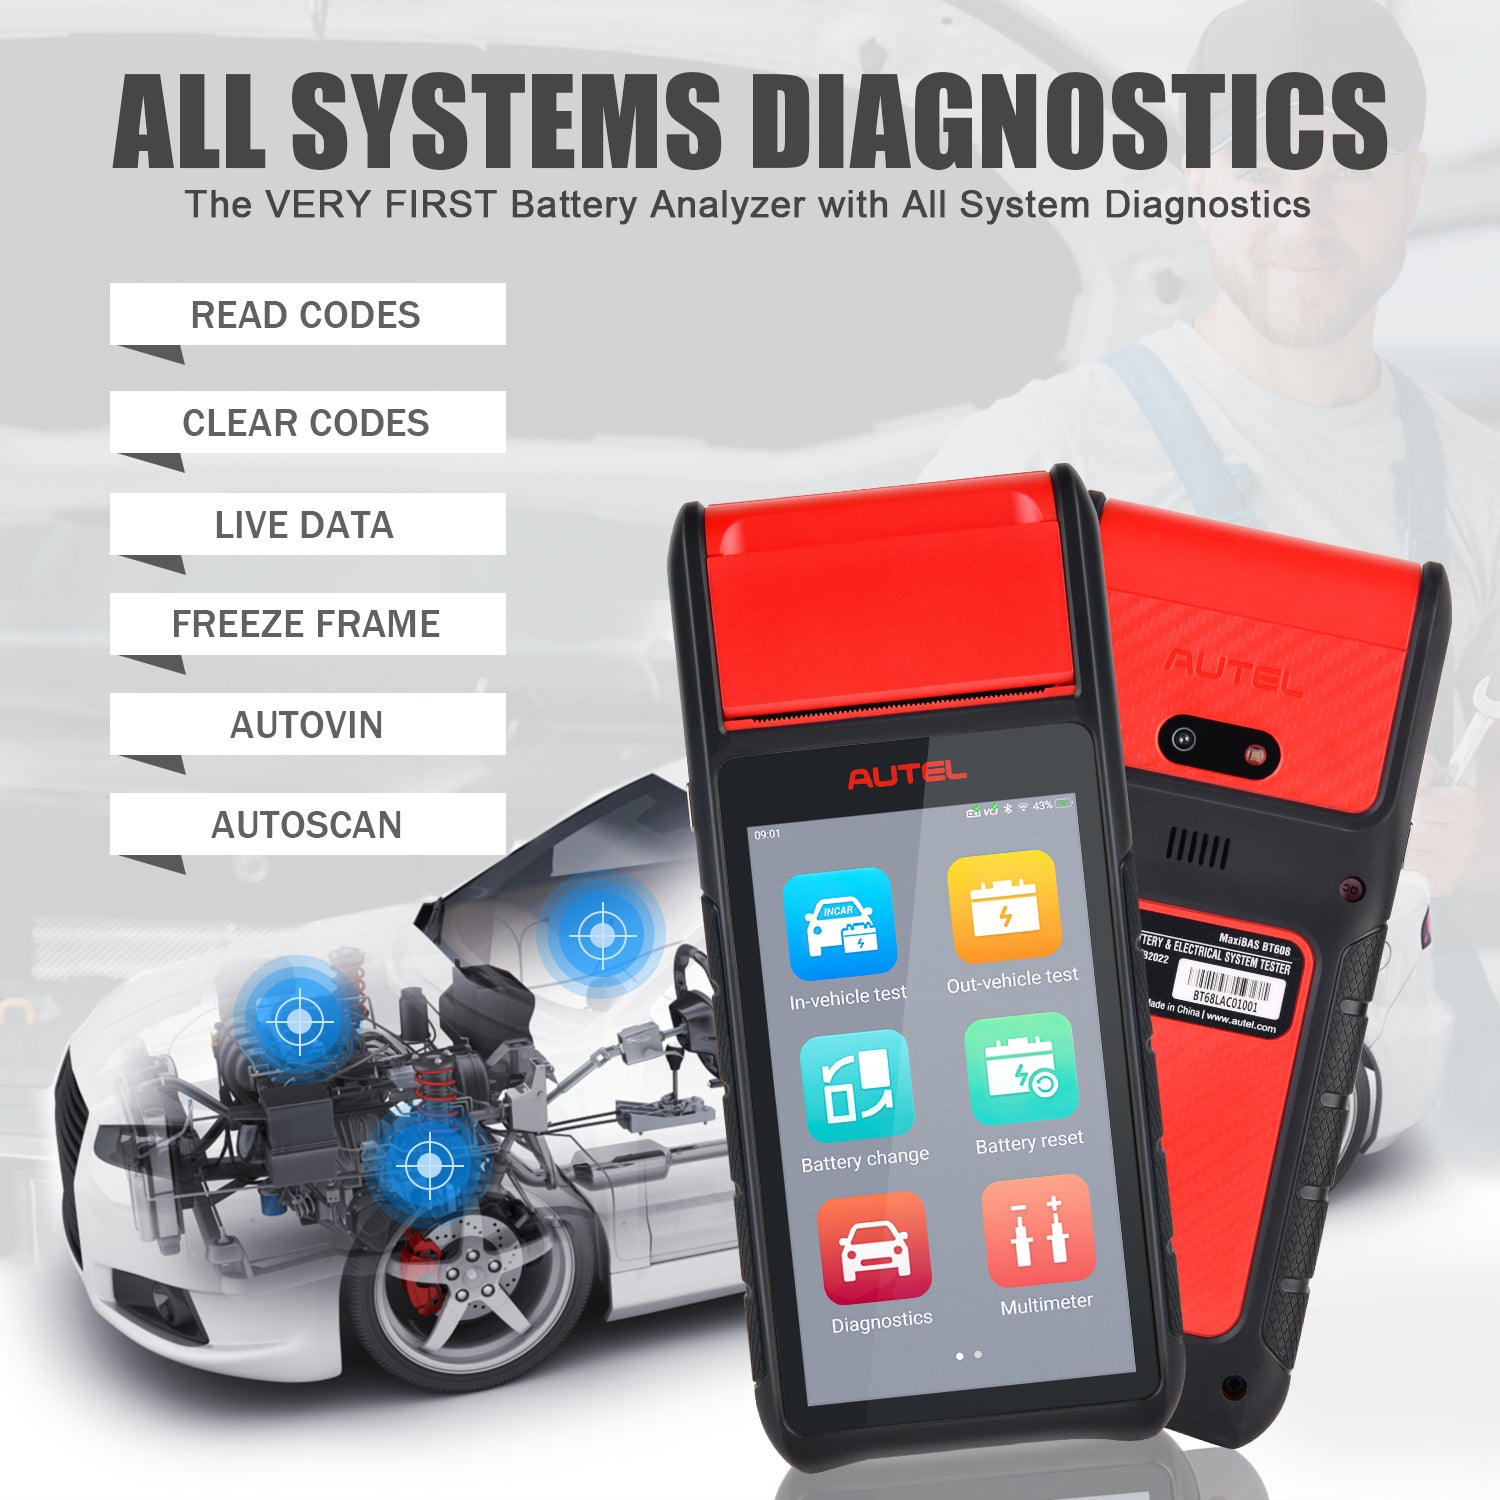 Autel MaxiBAS BT608 Car Battery Tester & Electrical System Diagnostic Tool for all system diagnostic